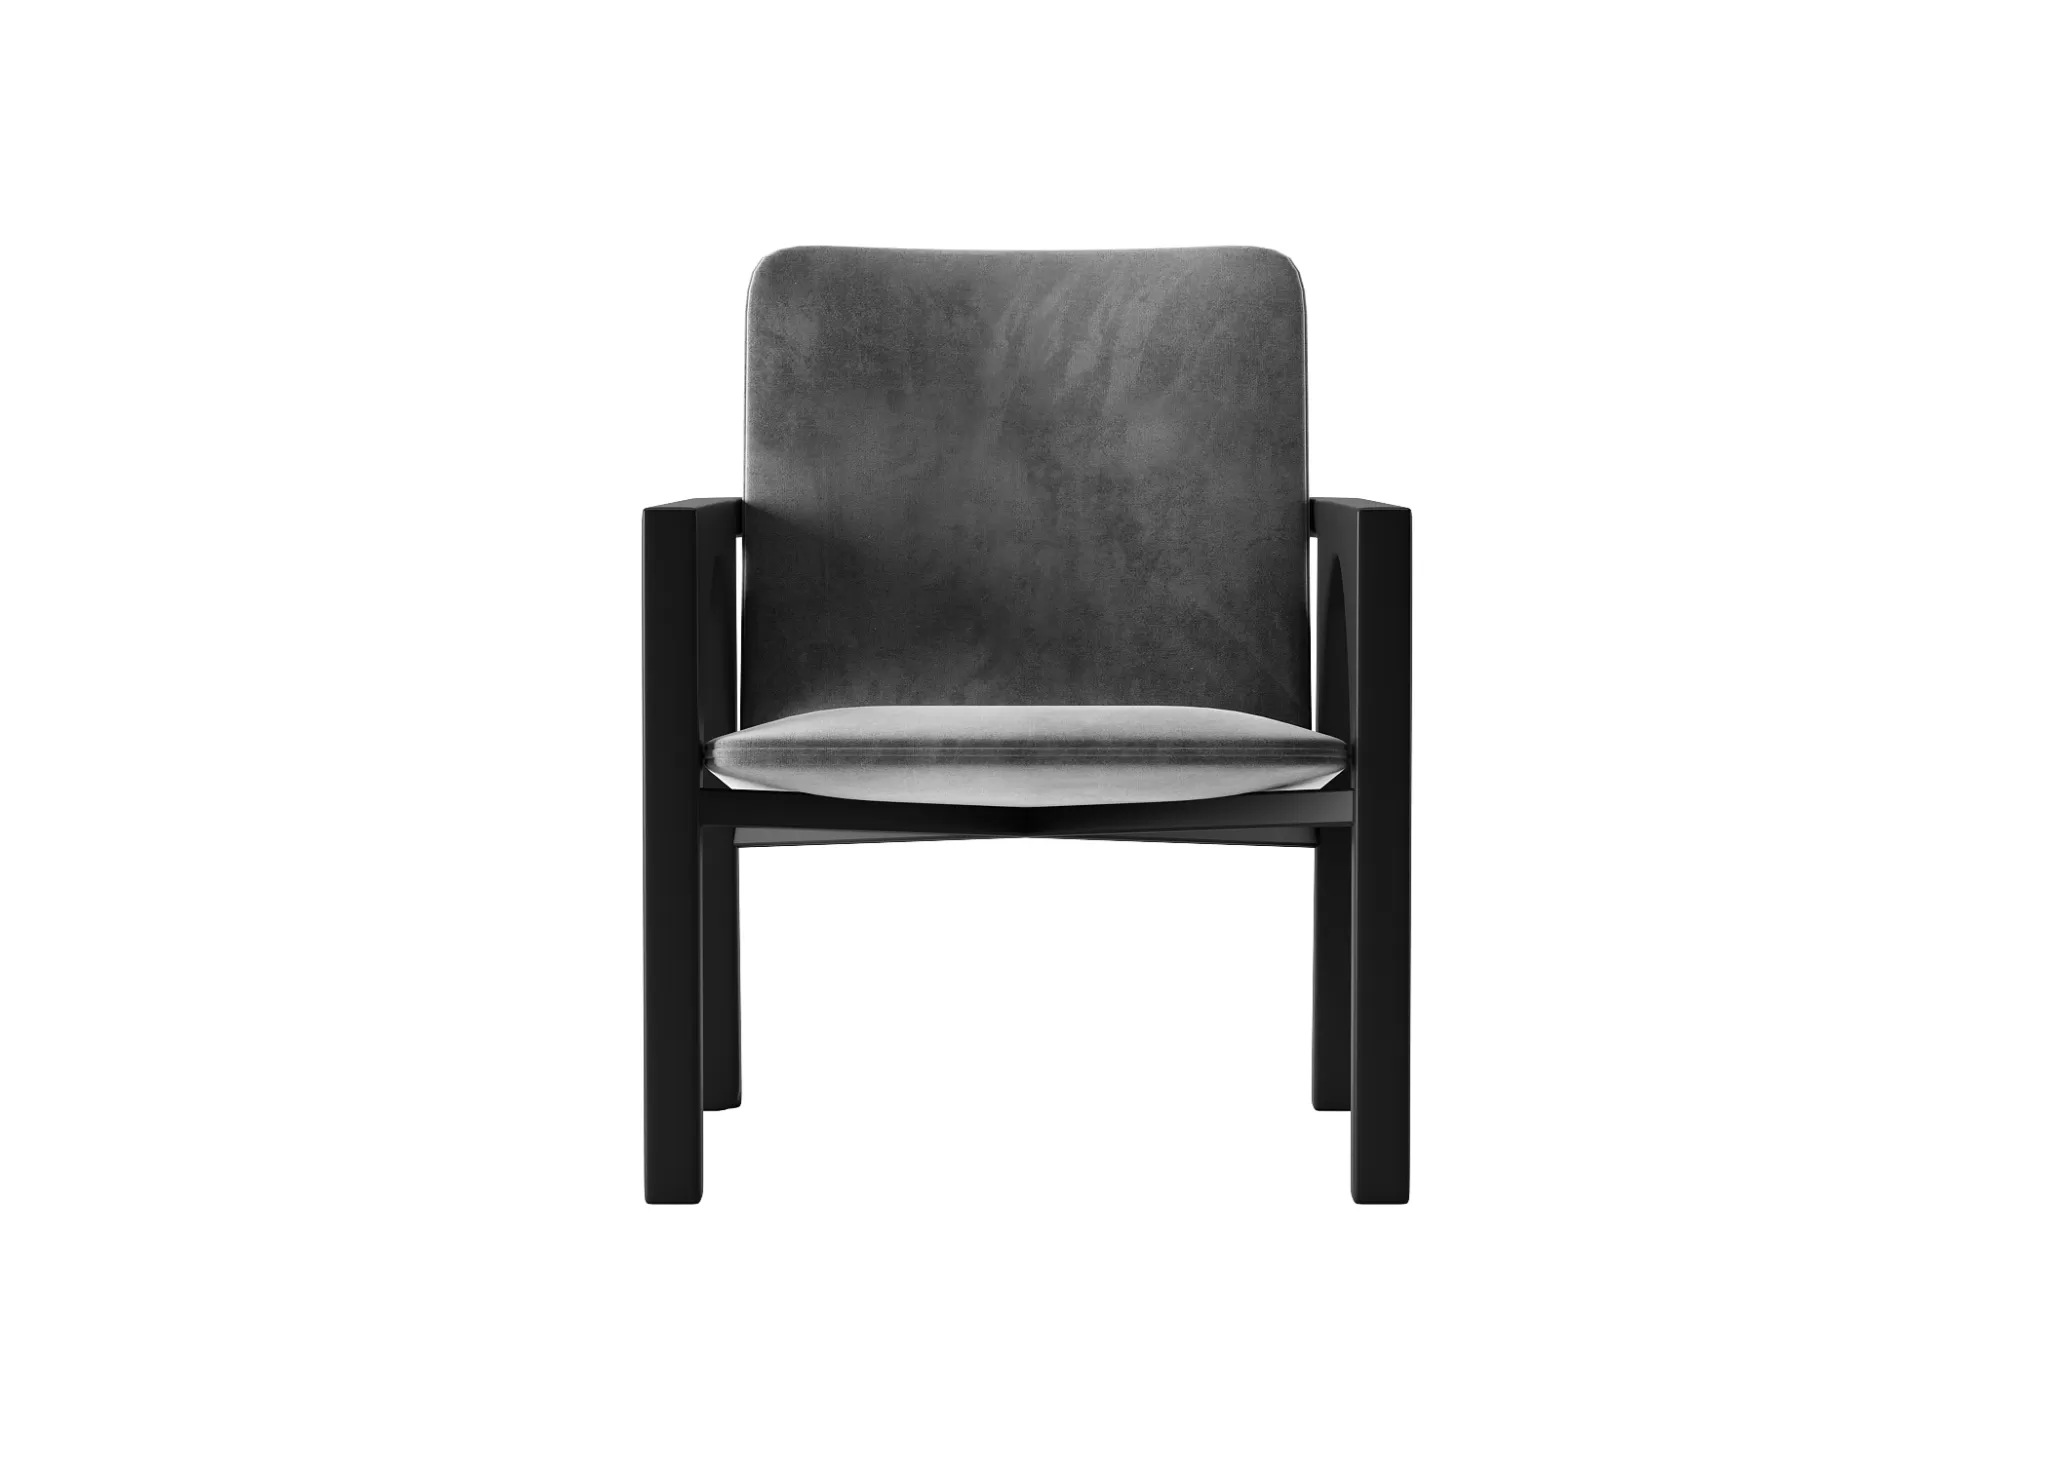 FURNITURE 3D MODELS – CHAIRS – 0068